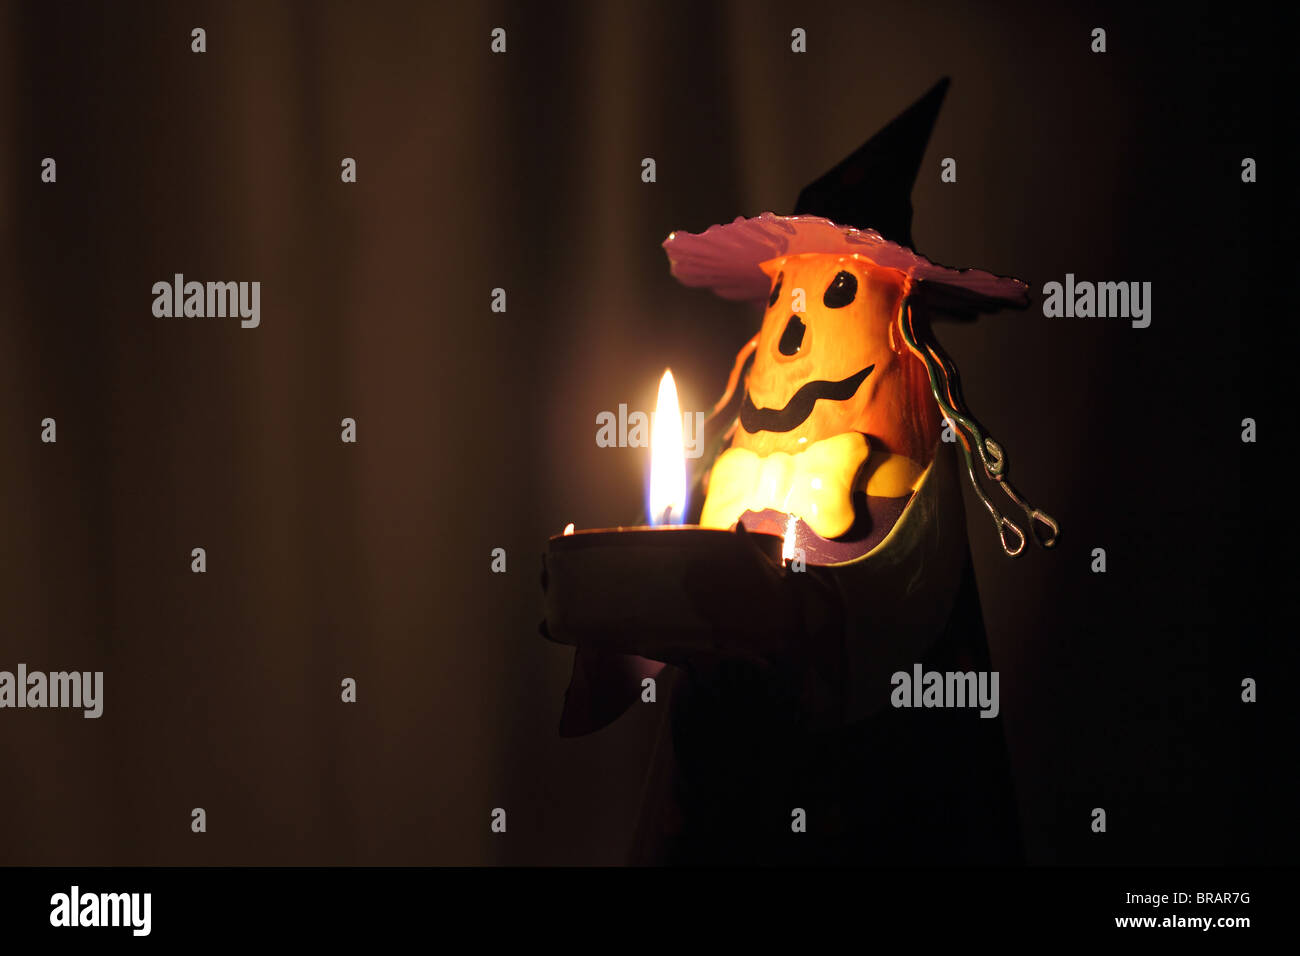 A Halloween decoration that has the face of a Jack-o-Lantern and the pointy hat of a witch. Shot in the dark, only light source is a candle. Stock Photo